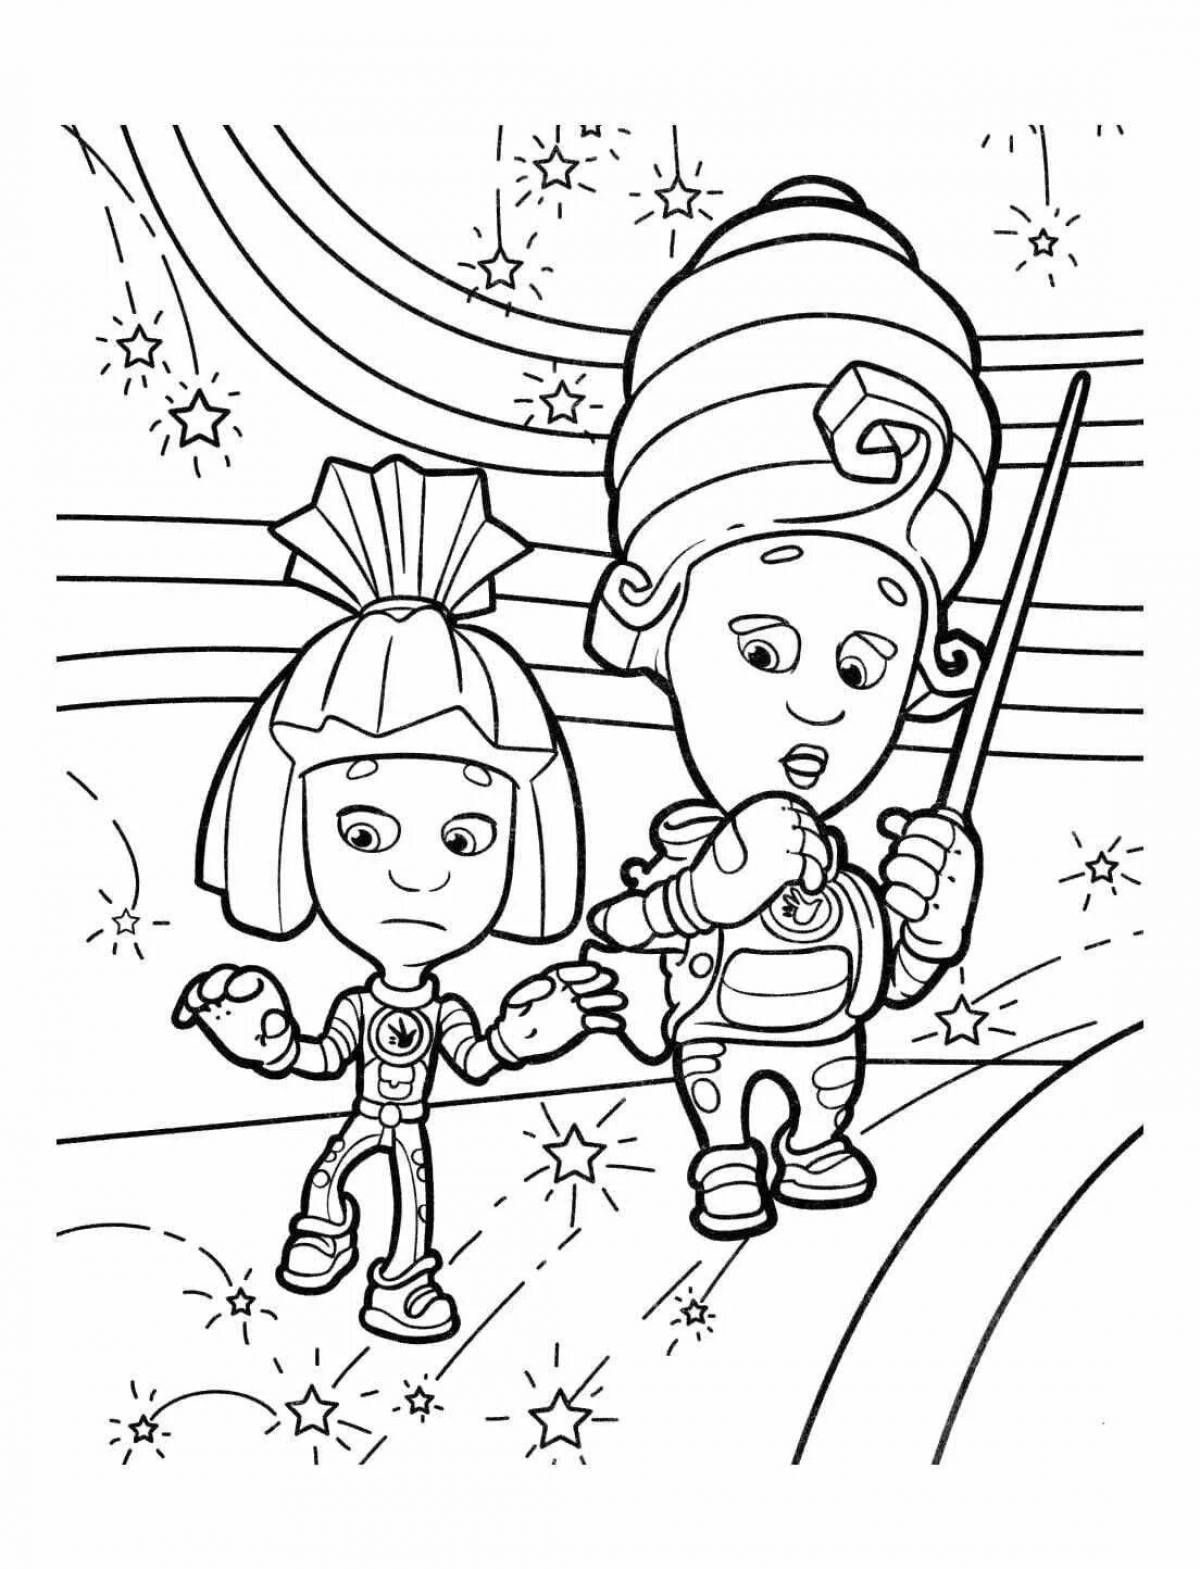 Fun coloring pages fixies for boys